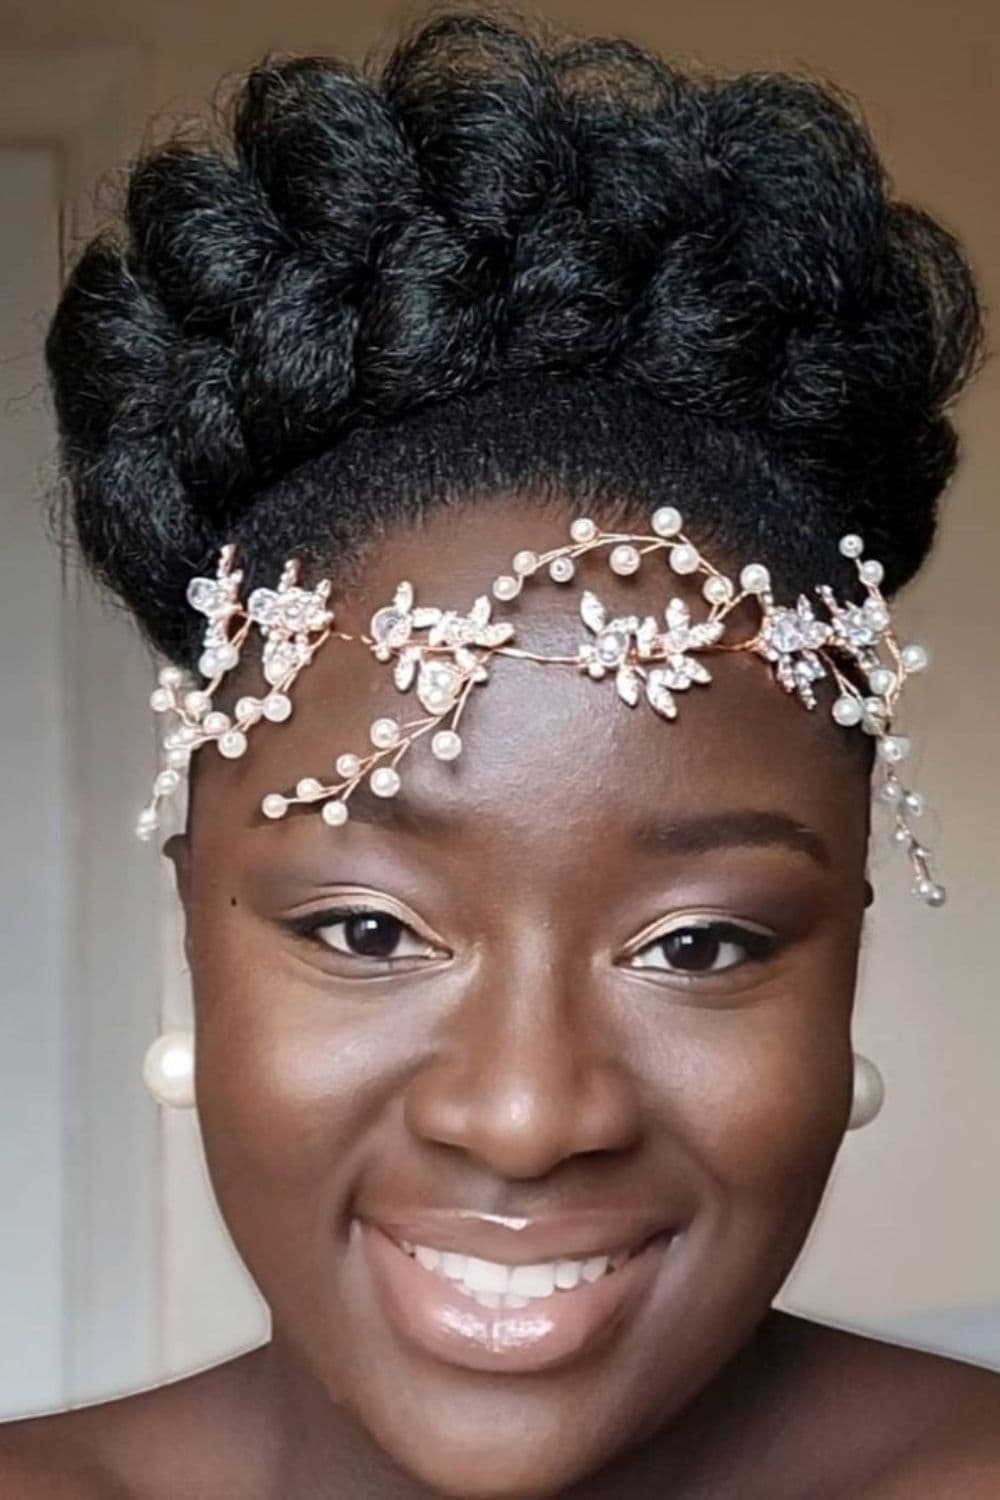 A woman with a black butterfly braid bun with an accessory on her forehead.